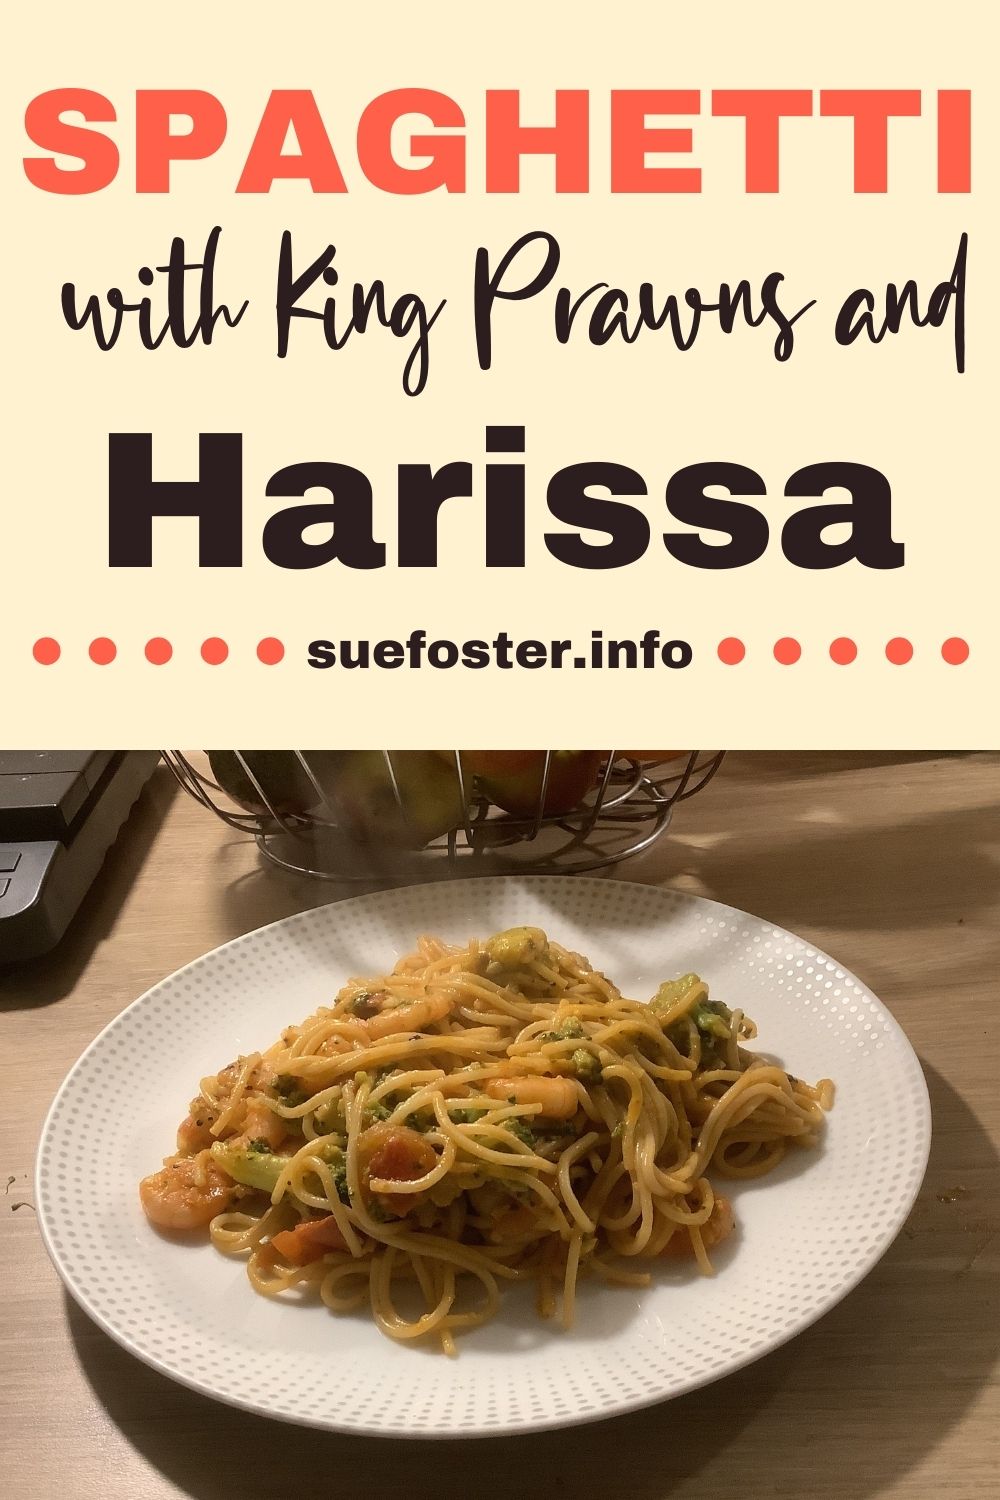 This recipe will teach you how to make harissa spaghetti with king prawns, which is a delicious dish with spicy, tangy and rich flavours.